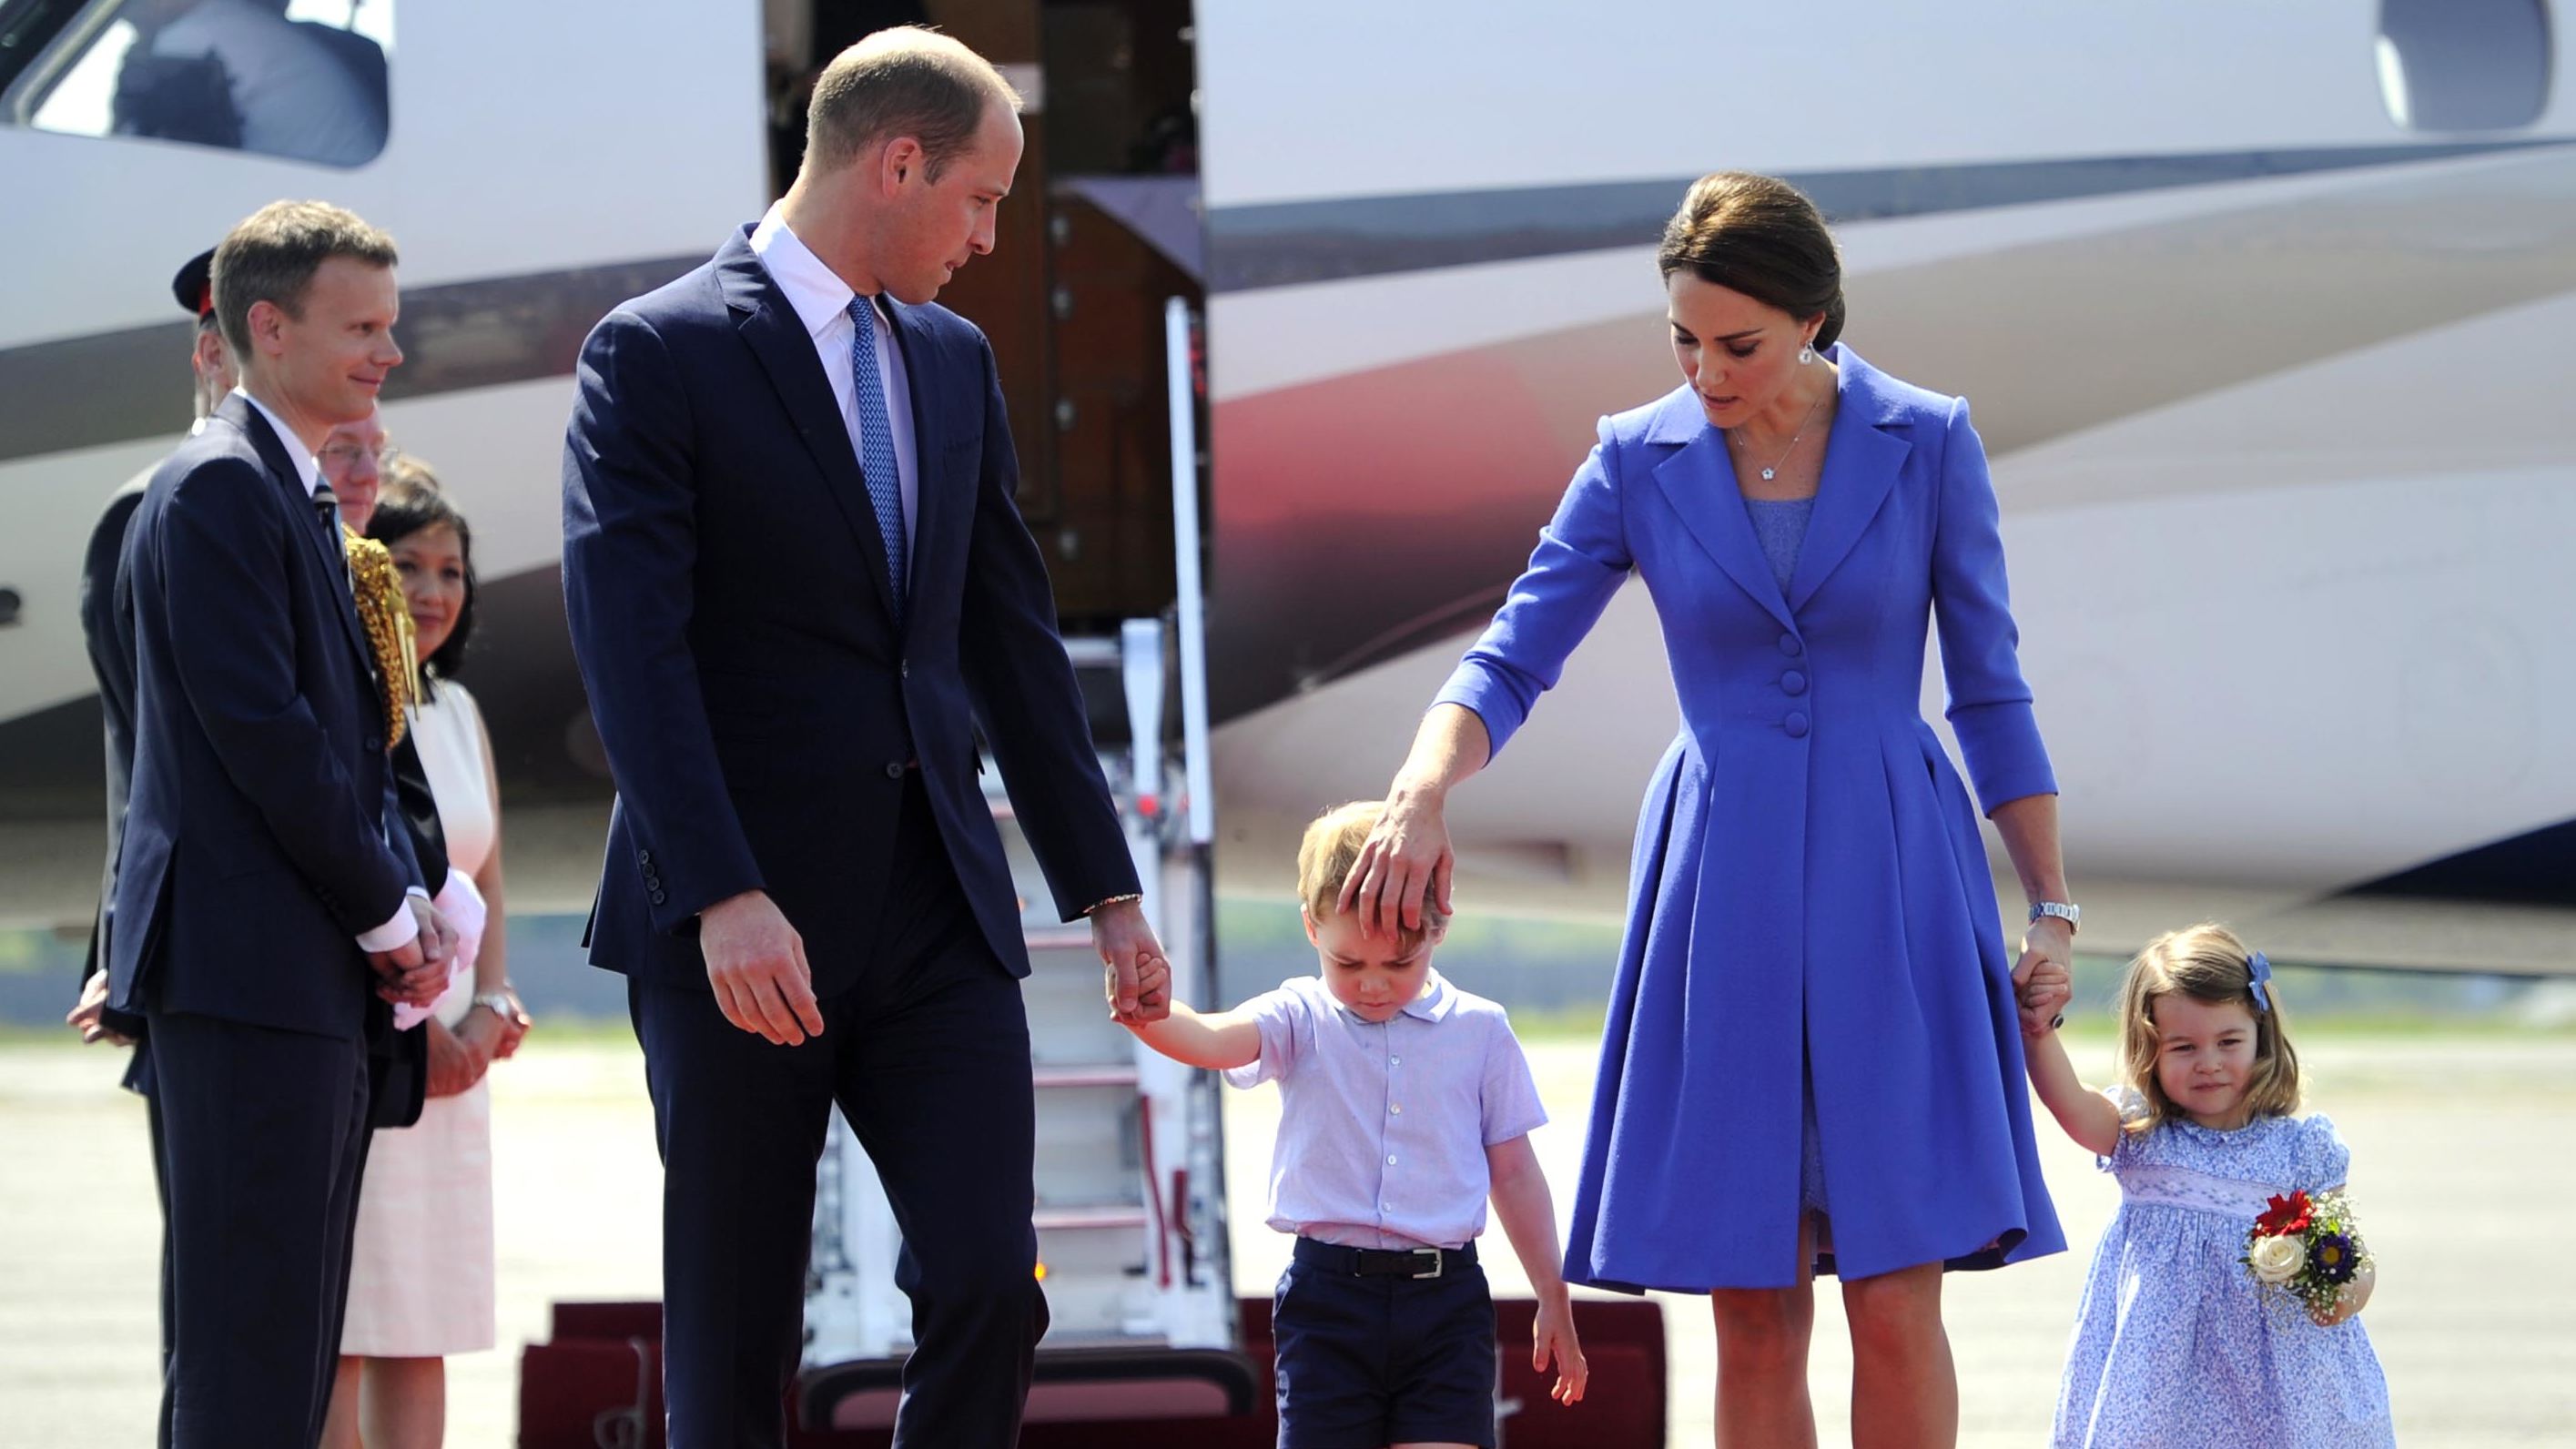 The royal family arrives at the airport in Berlin for a three-day visit in Germany in July 2017.